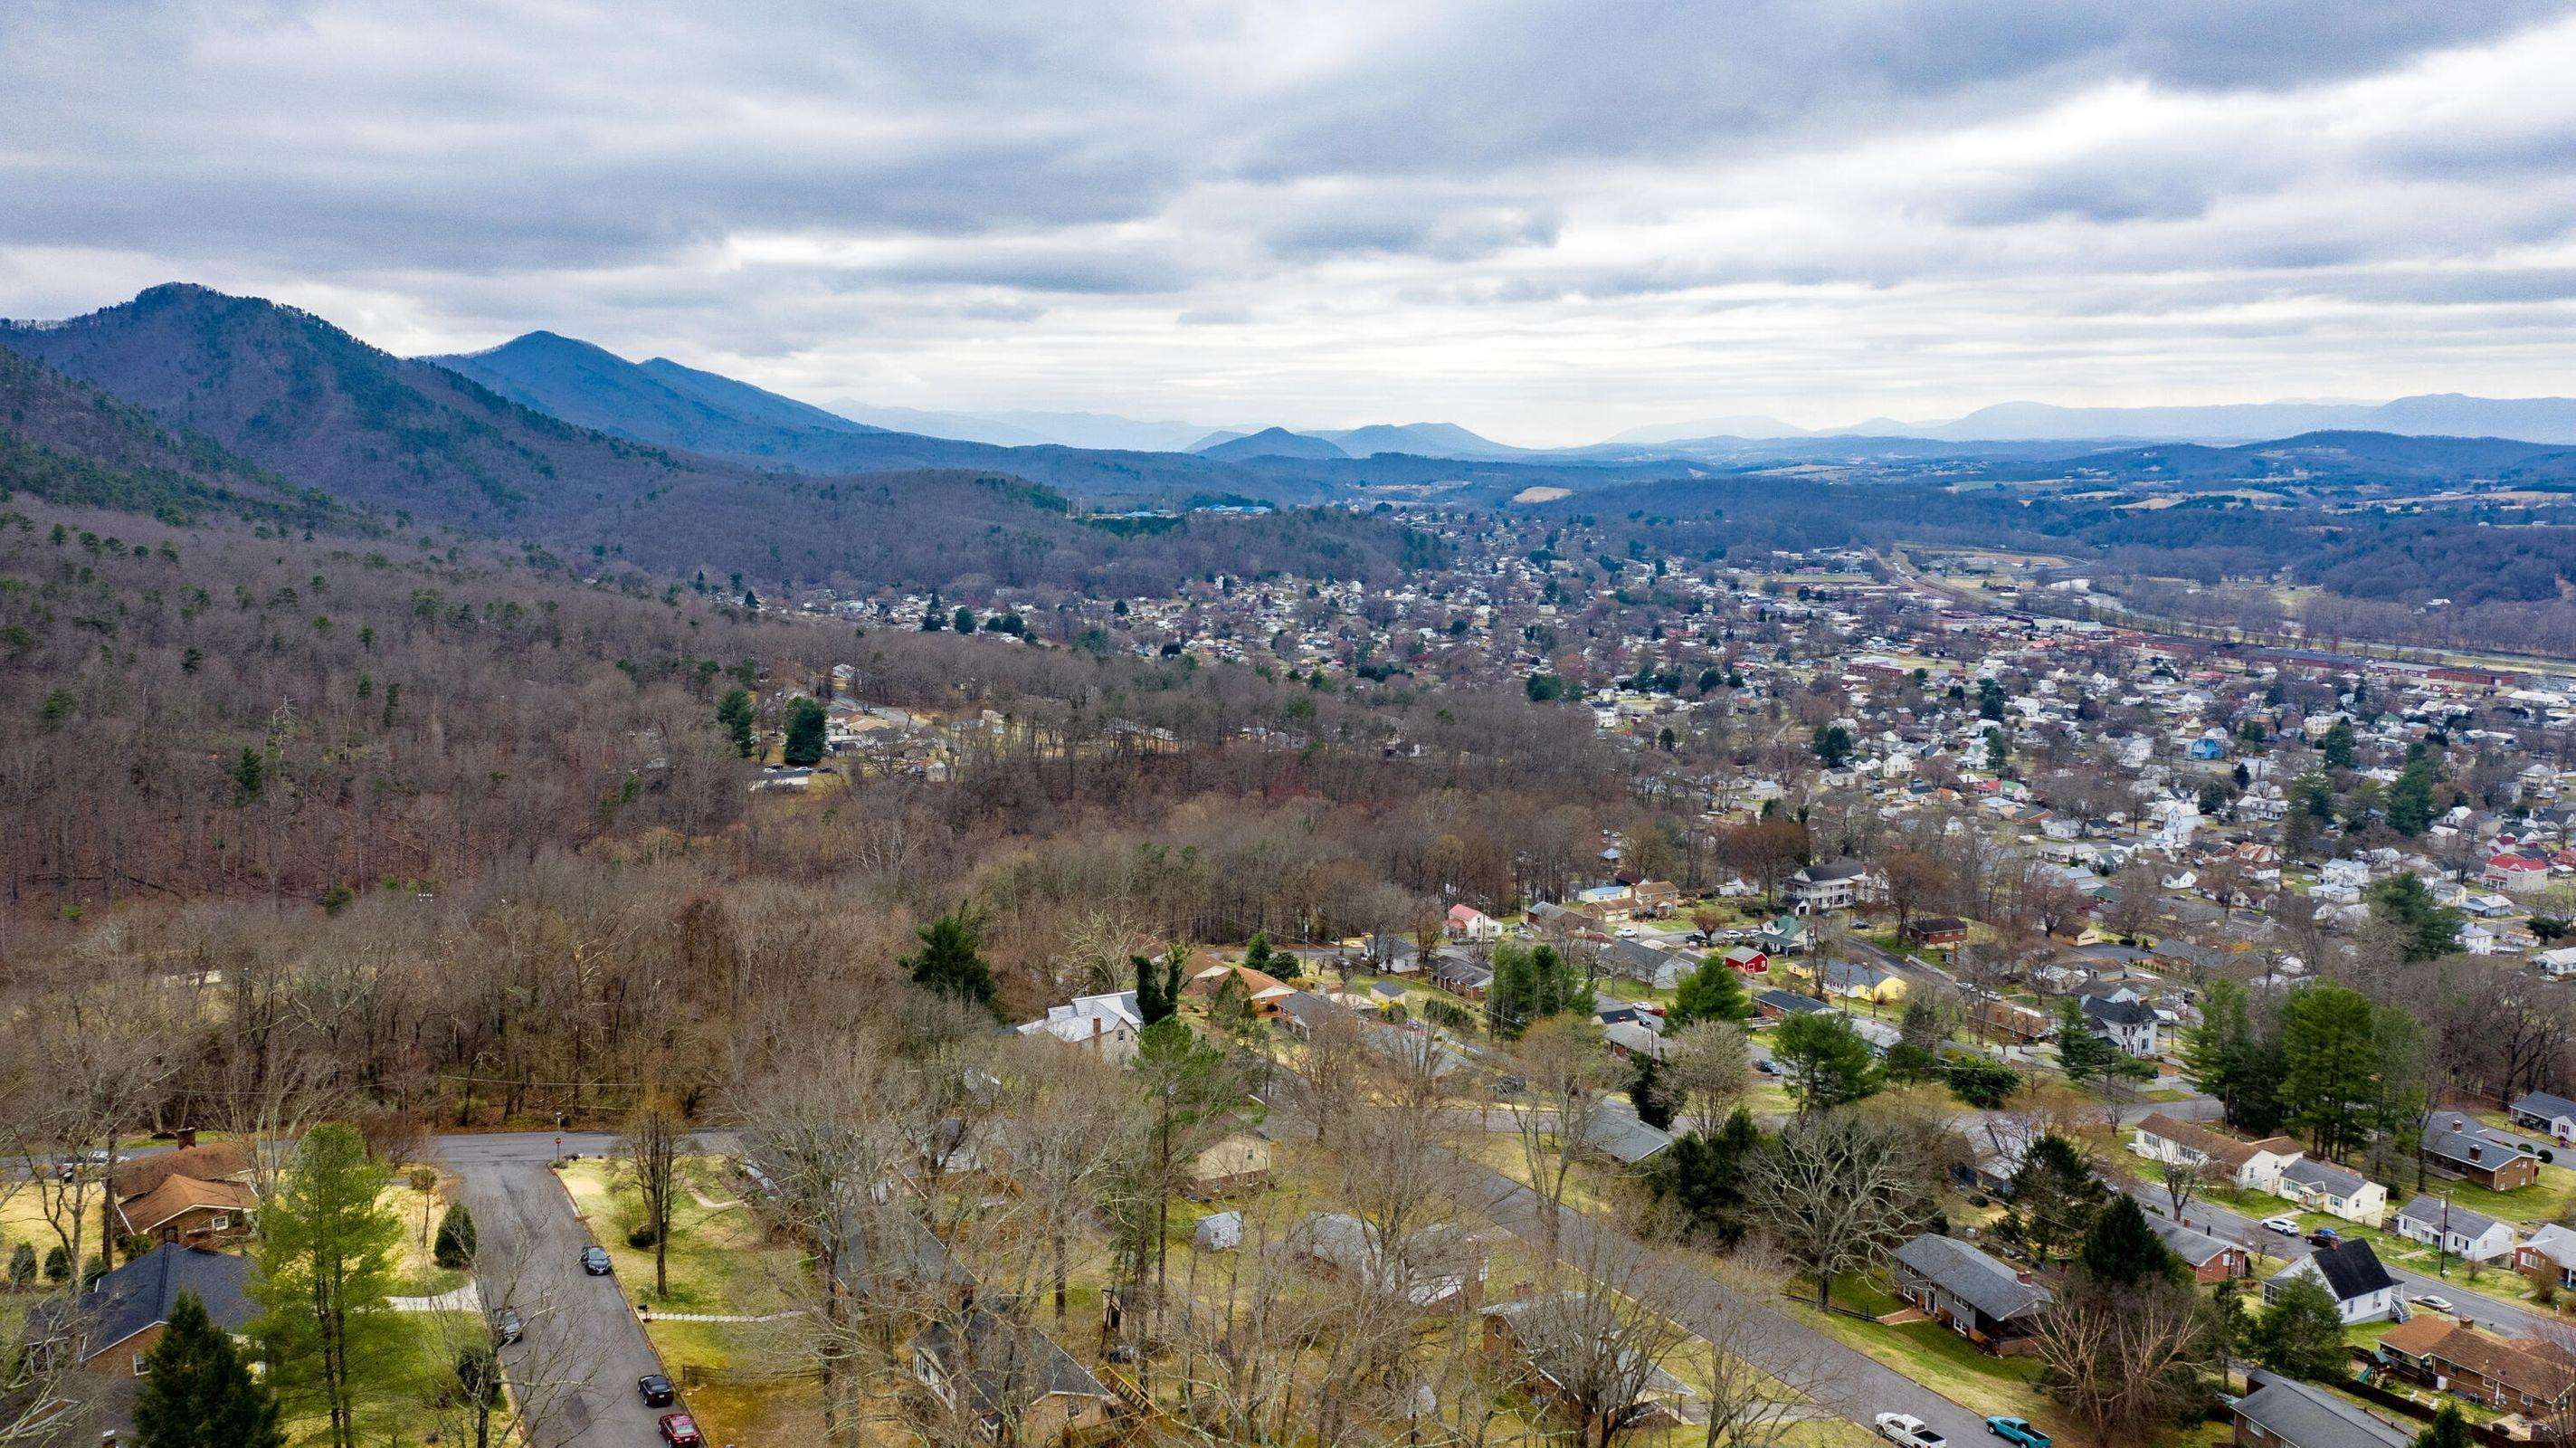 Nestled in the foothills of the Blue Ridge with expansive views of the valley and the Alleghenies.